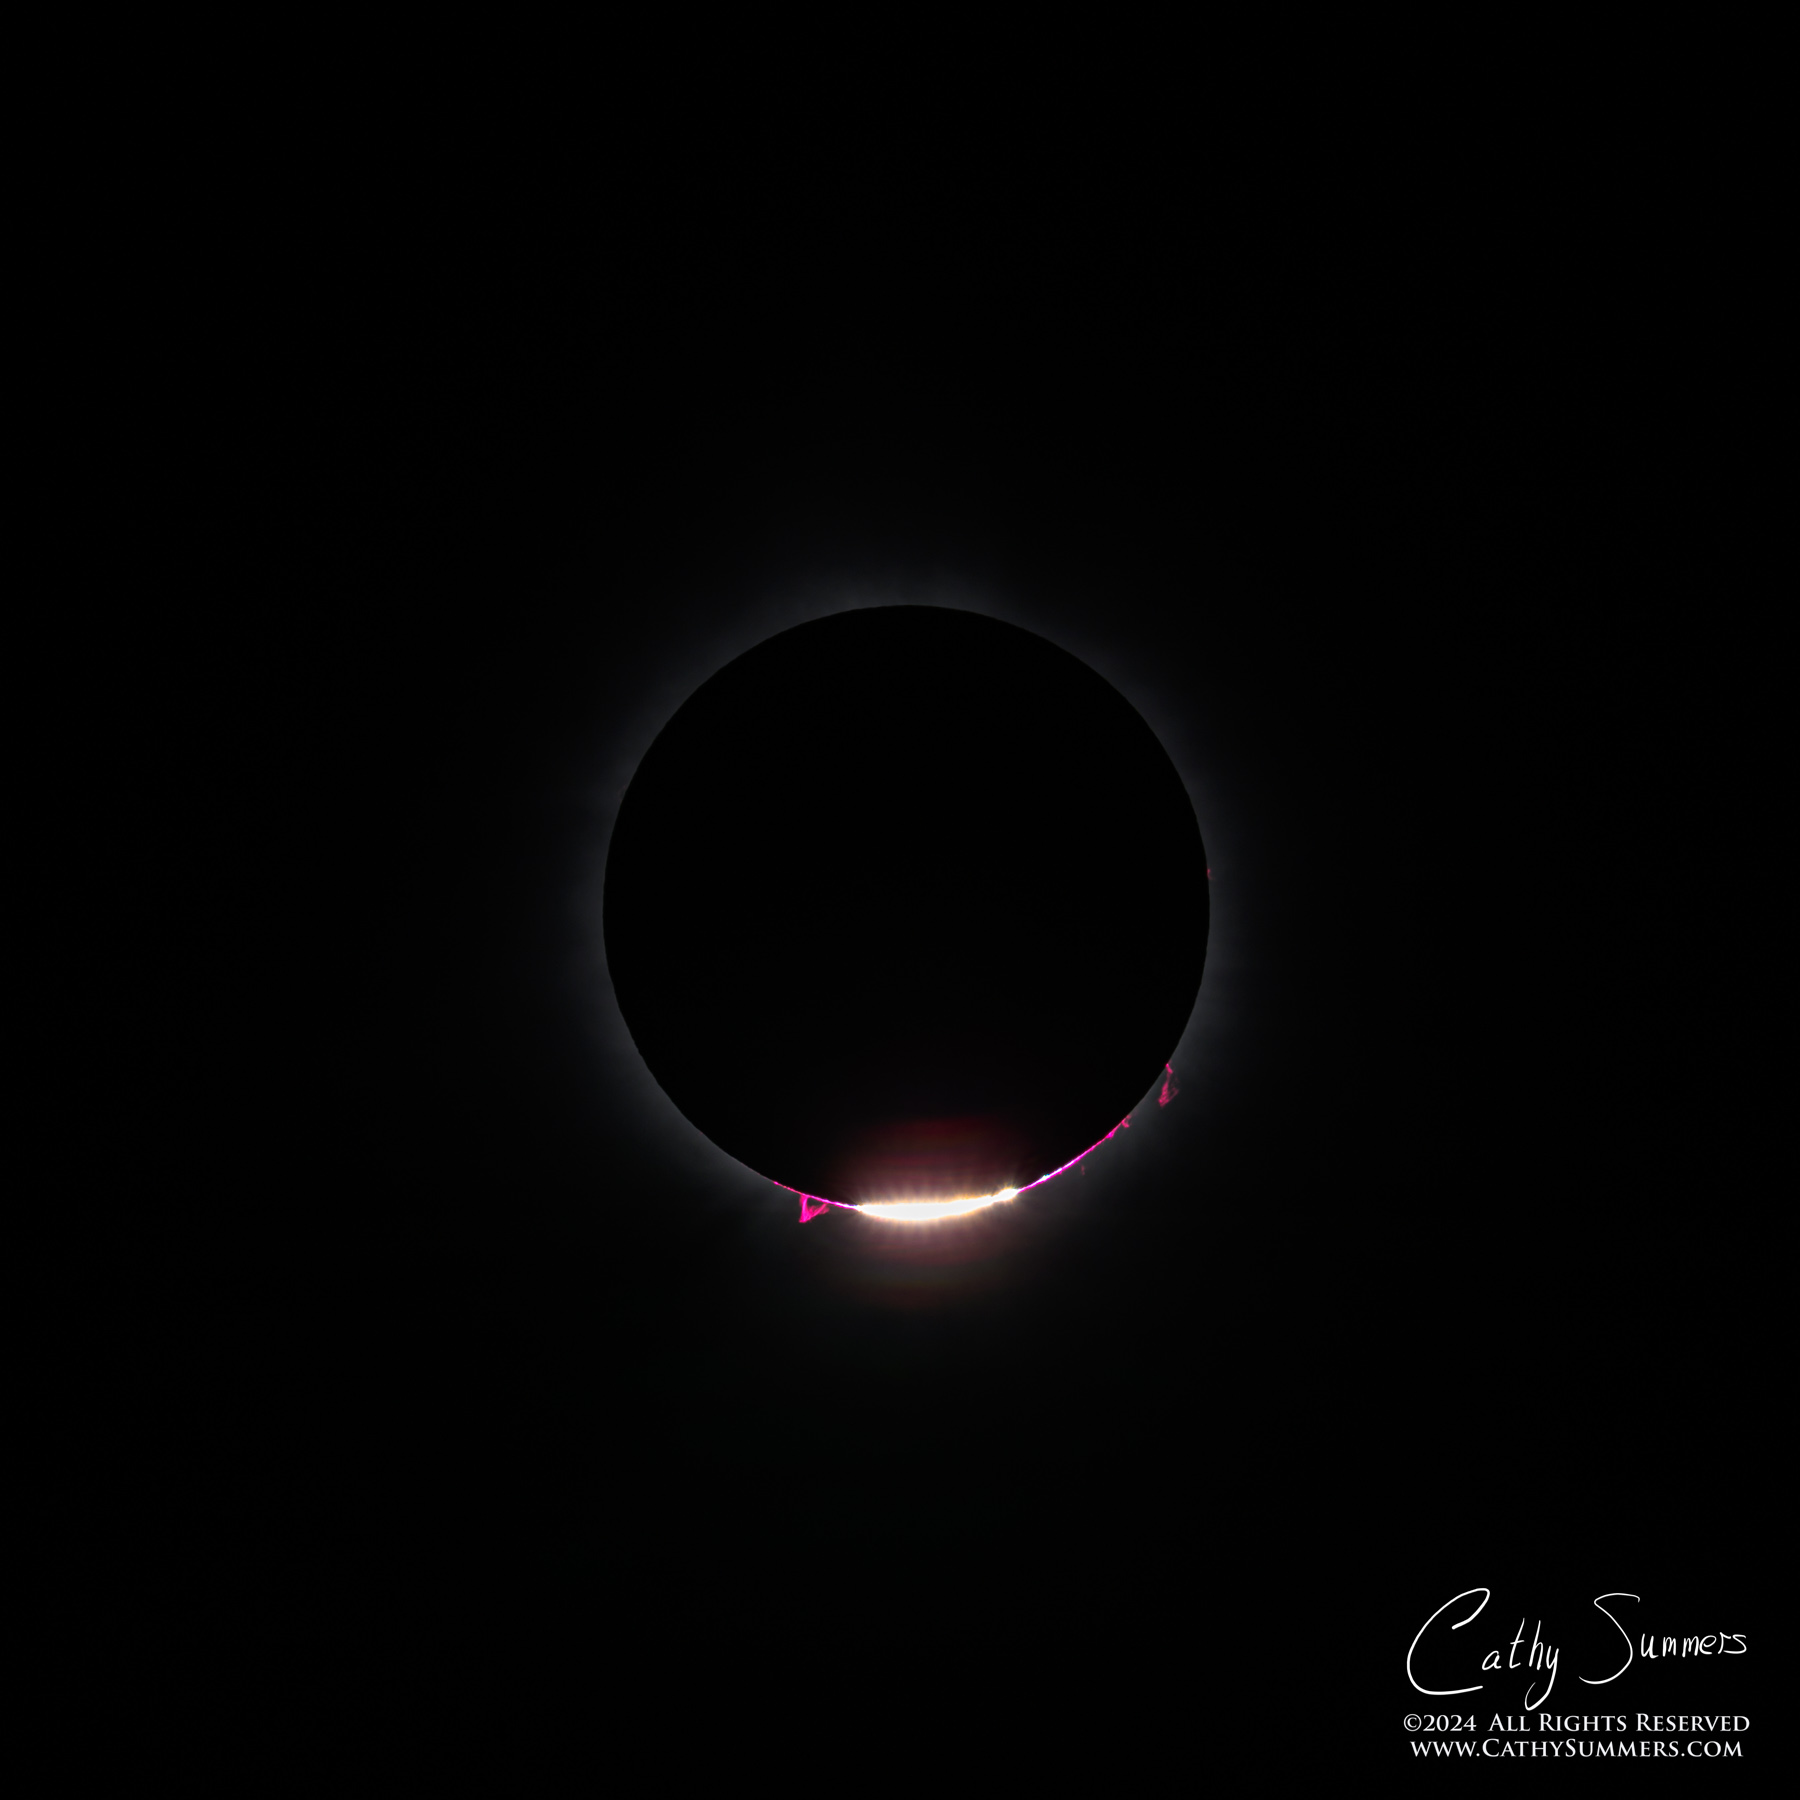 Diamond Ring and Solar Prominences During the 2024 Solar Eclipse as Totality Draws to an End